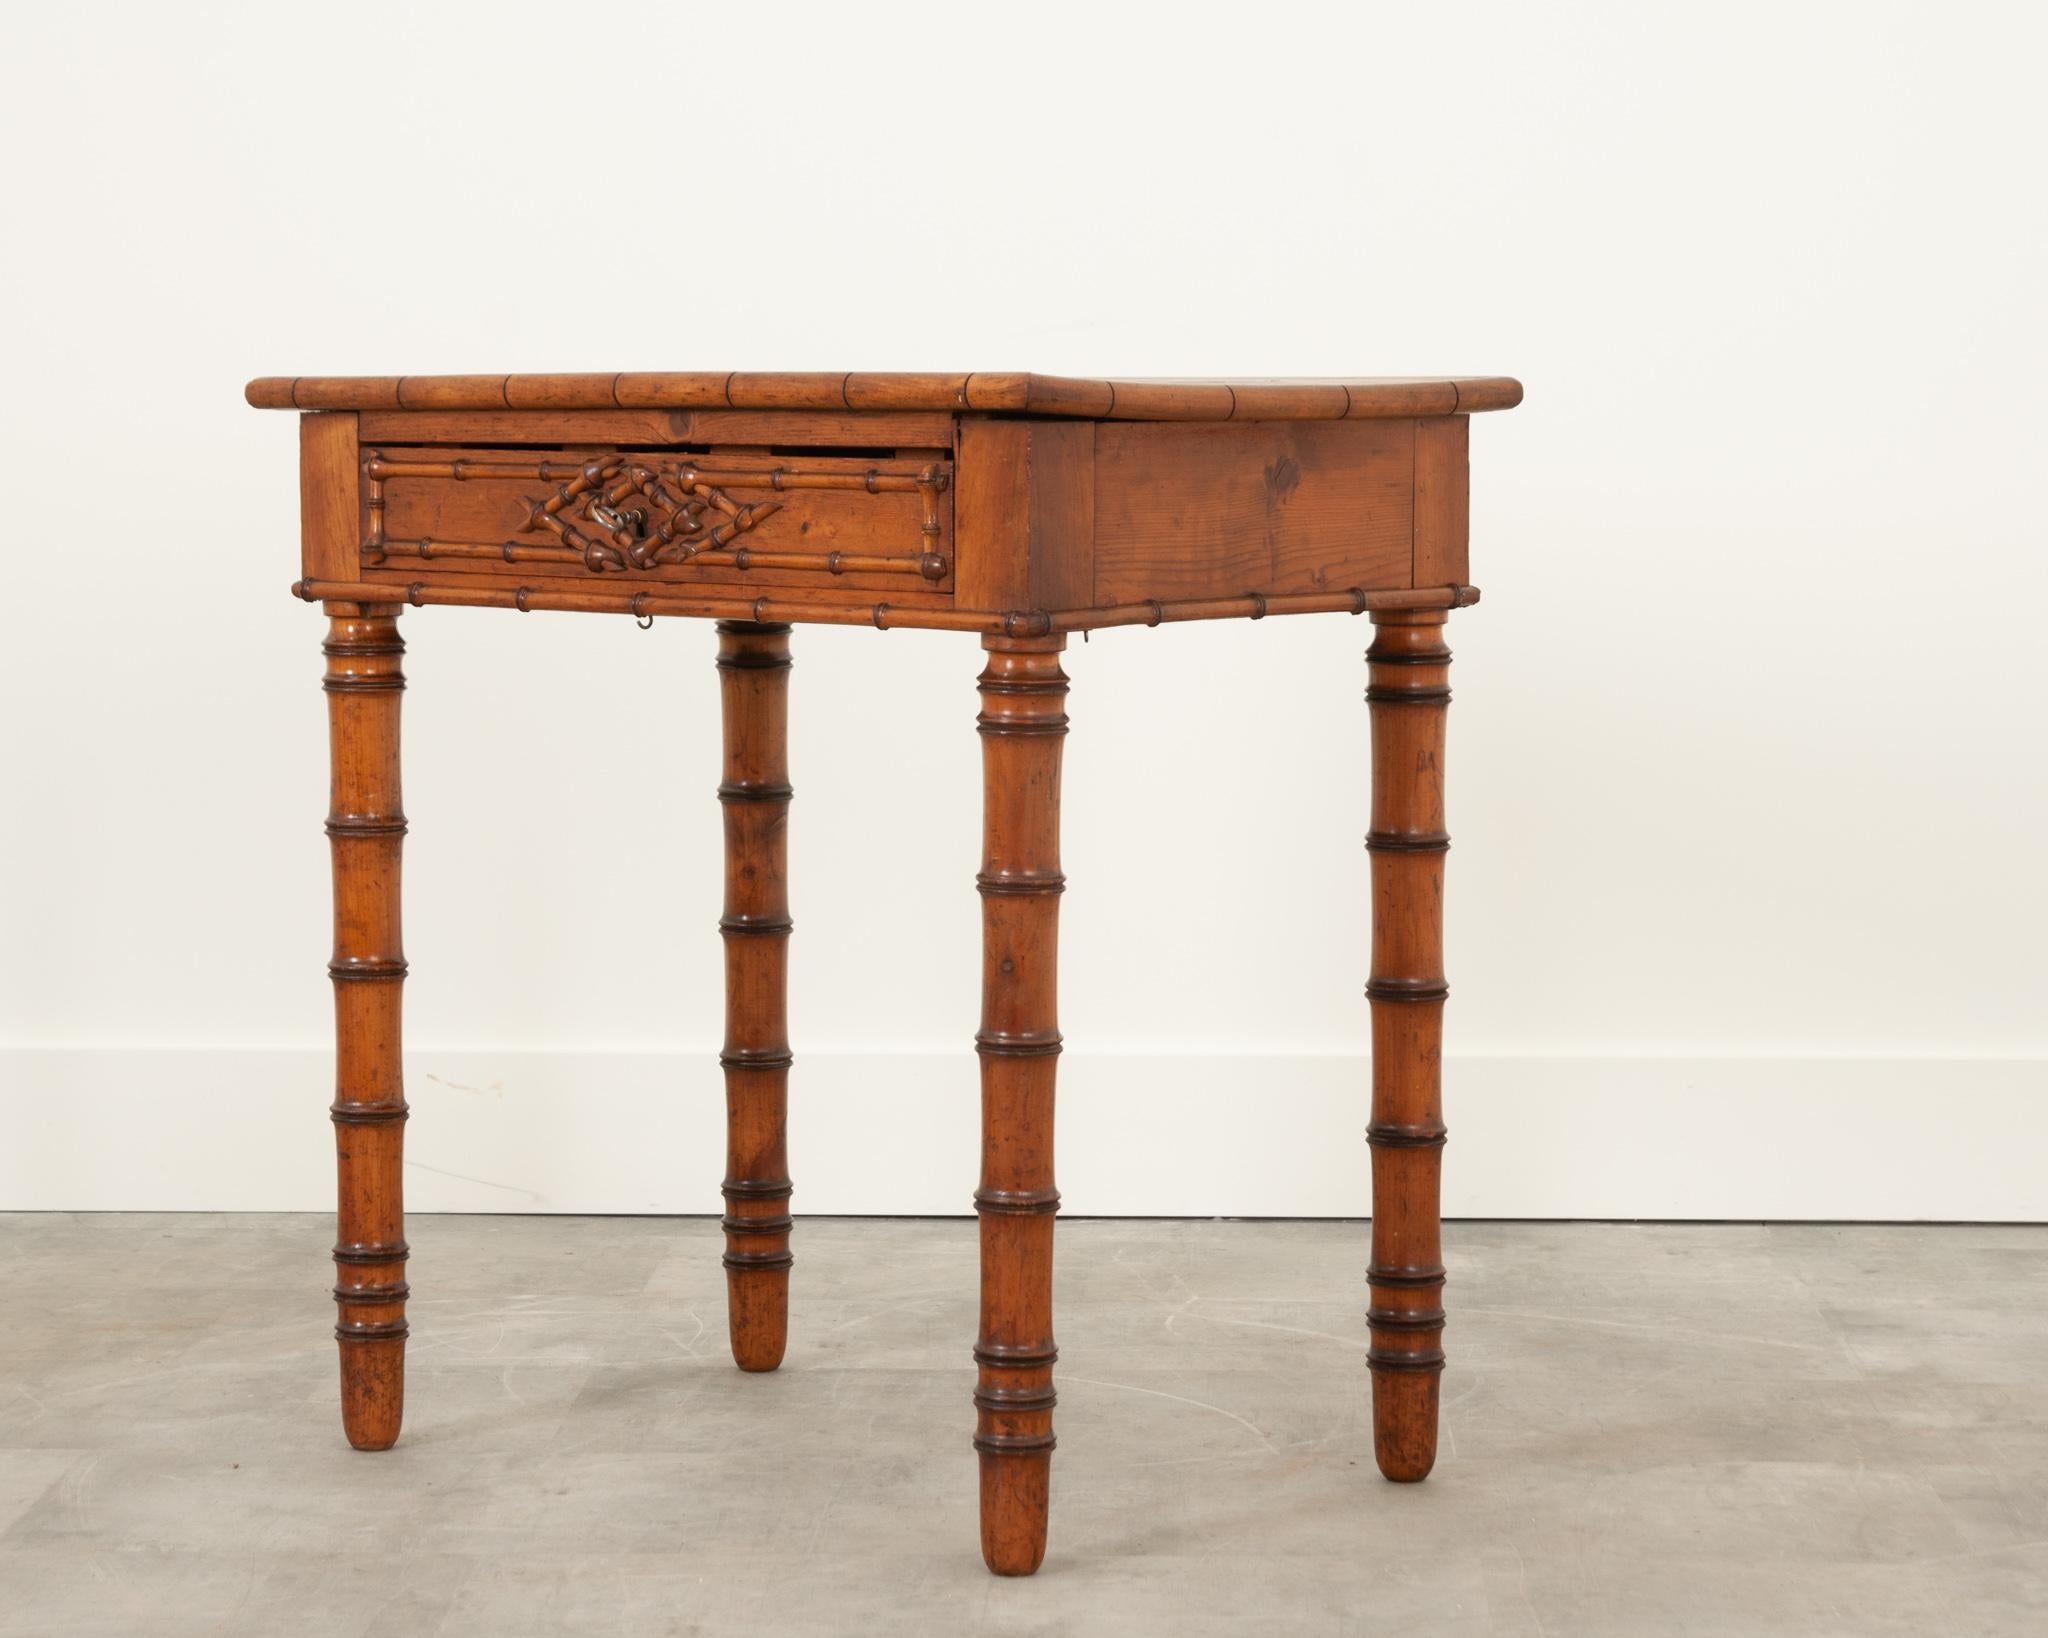 This funky, faux bamboo table was crafted in France during the 19th century. The vibrant pine has a fantastic patina throughout. The apron houses a single drawer with a criss-cross faux bamboo carved design. One key is included for the functional